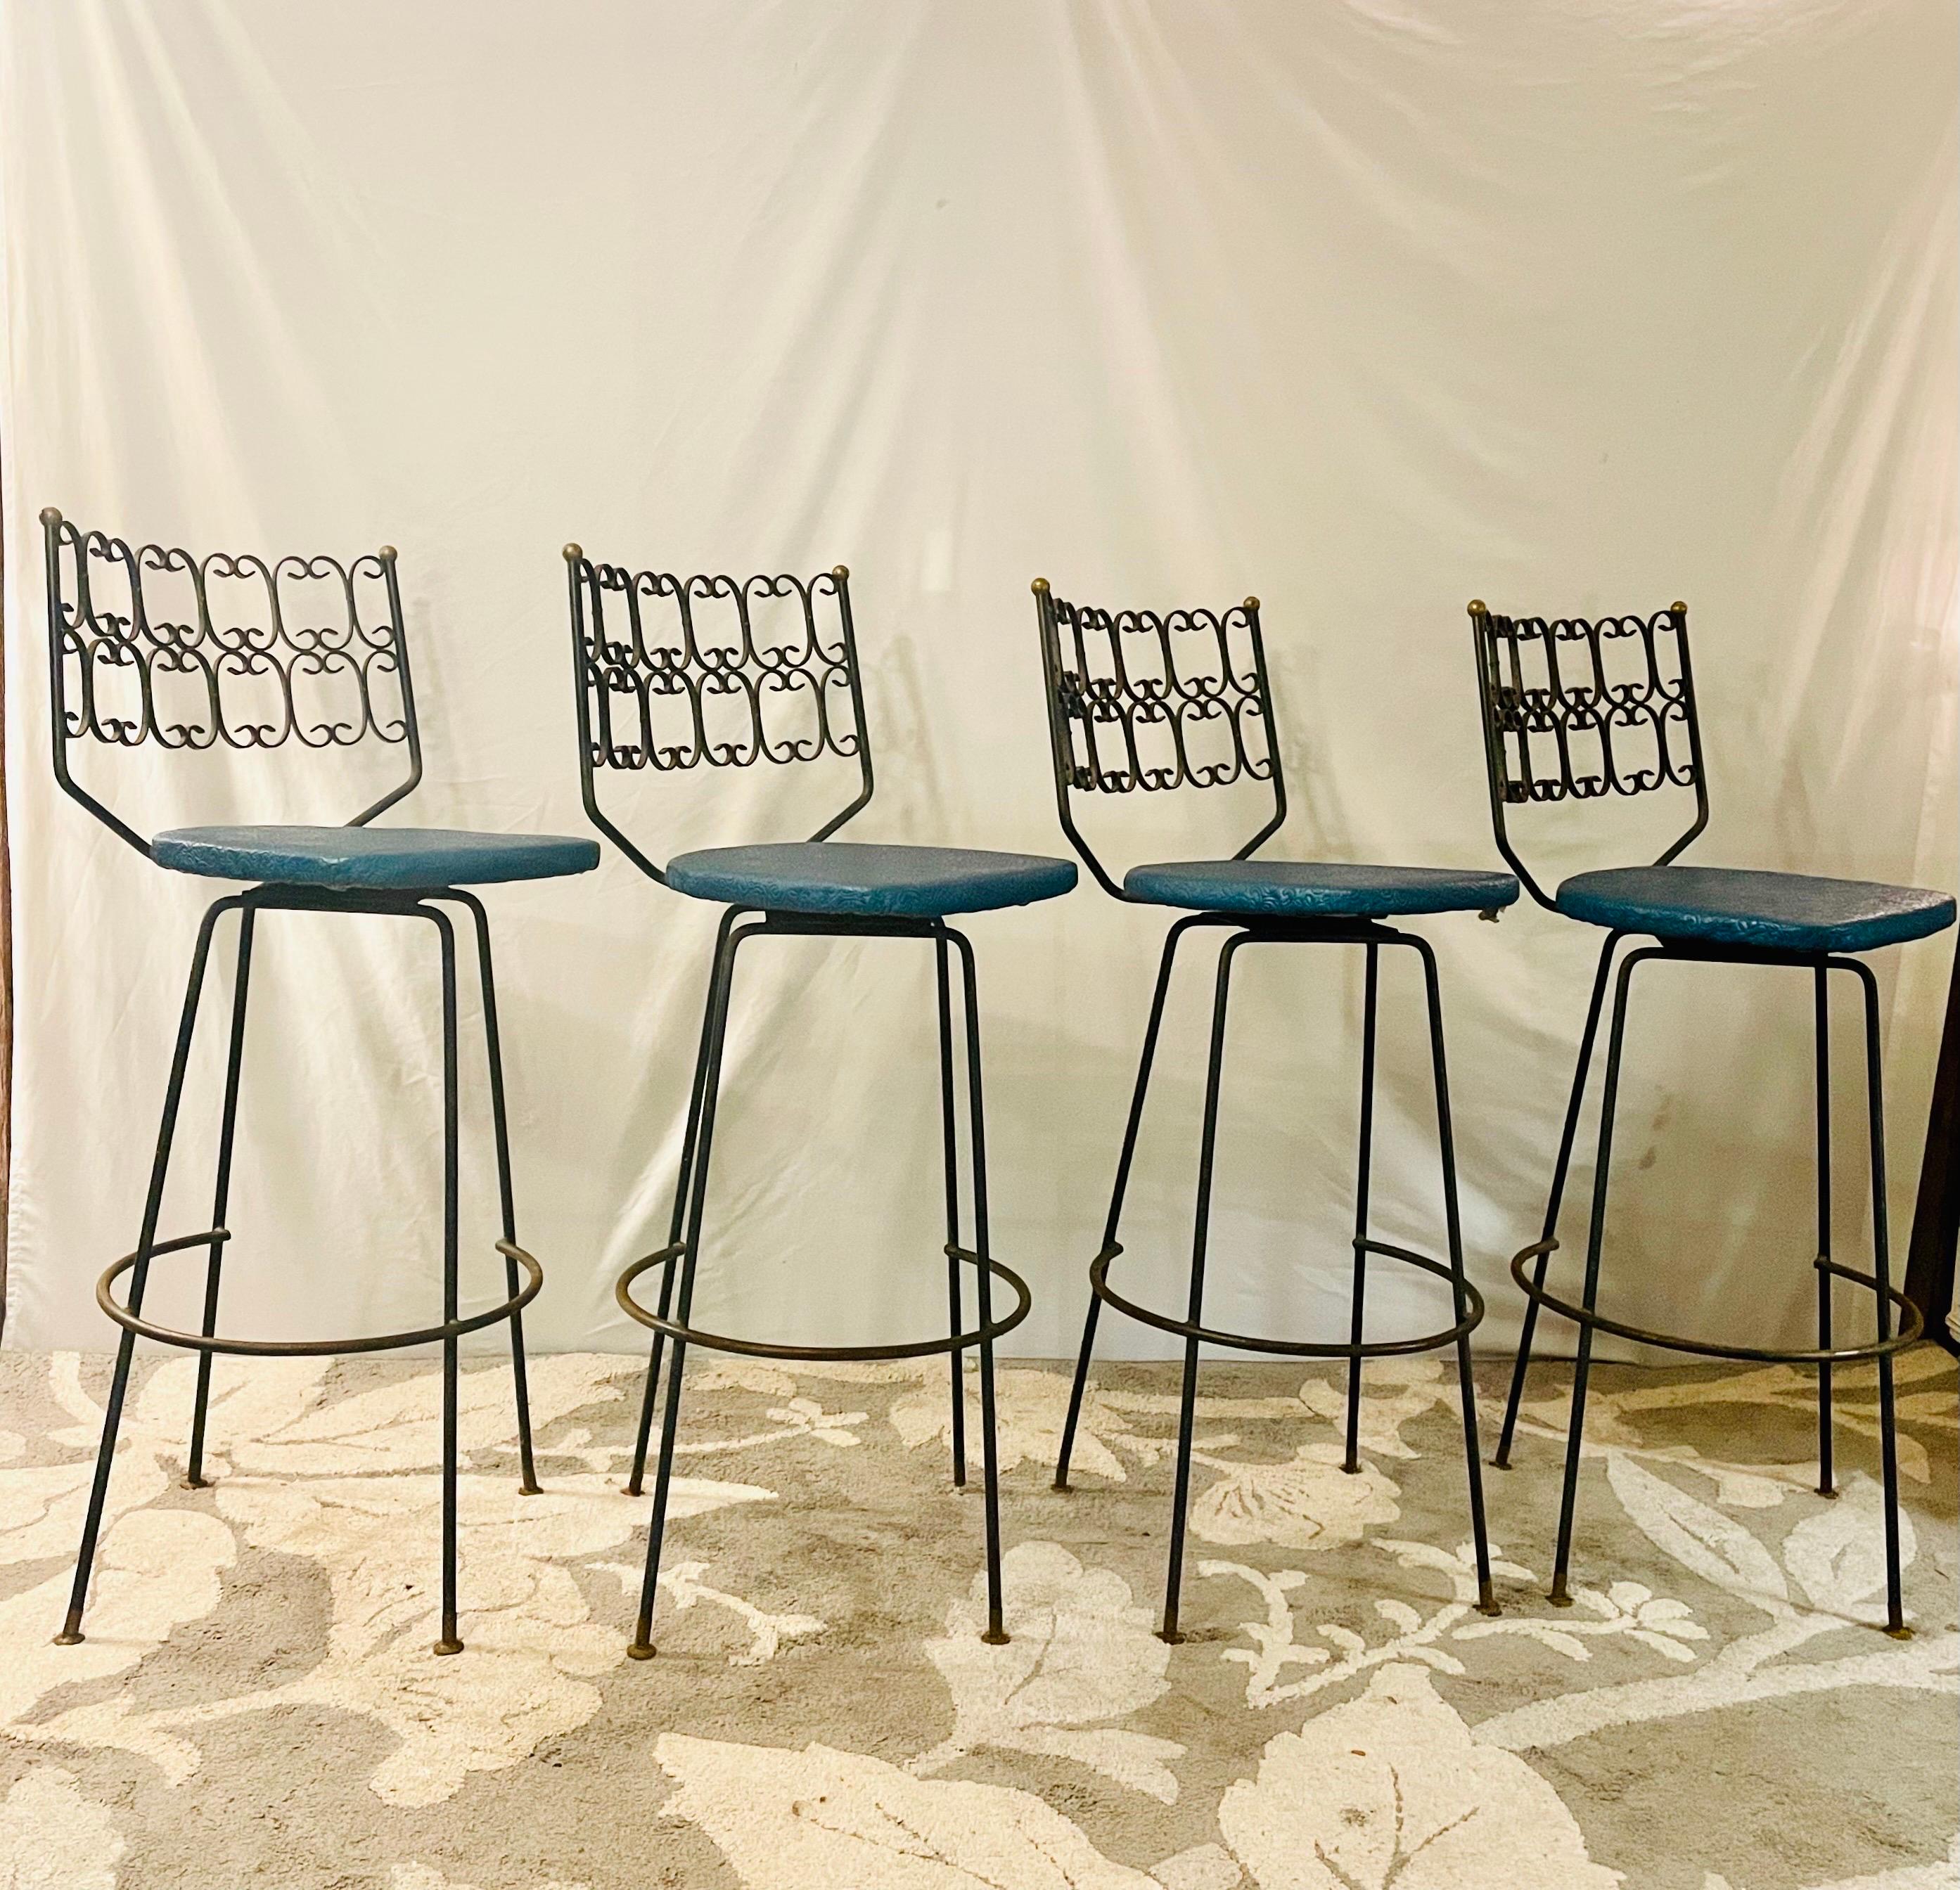 Arthur Umanoff Swivel bar stools-A set of 4

In stock and ready to ship

Bar height stools with Vinyl Seating 

Perfect for indoor use or outdoors on your deck, garden, or patio

Heavy wrought iron with gold accent detail.

 